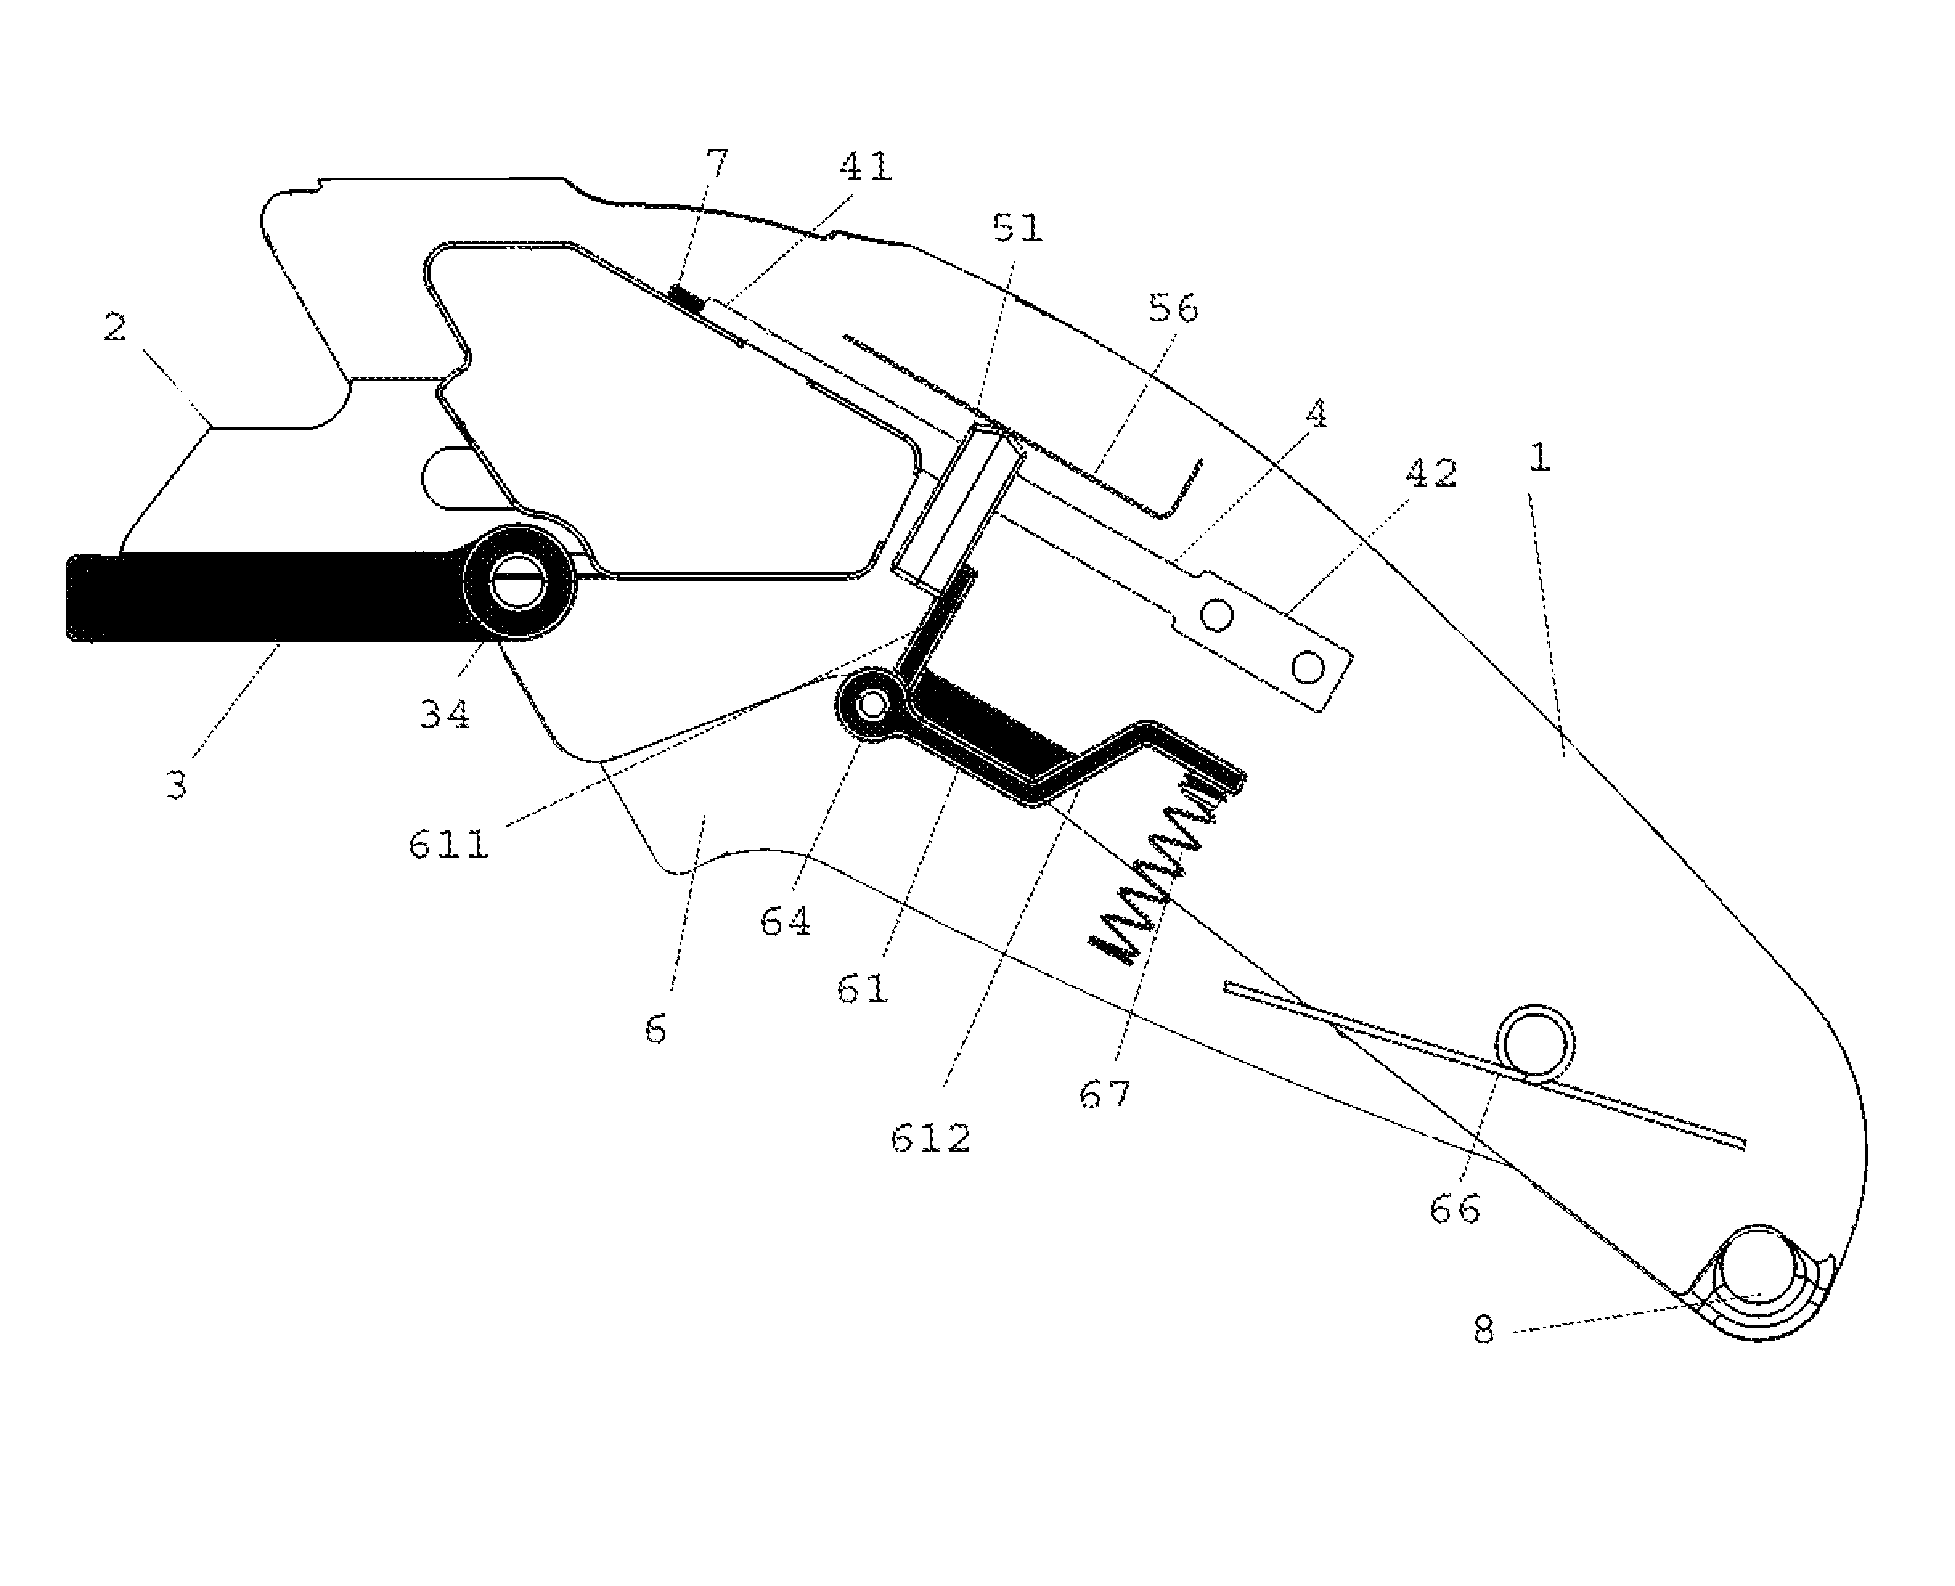 Hand cutter with blade guard